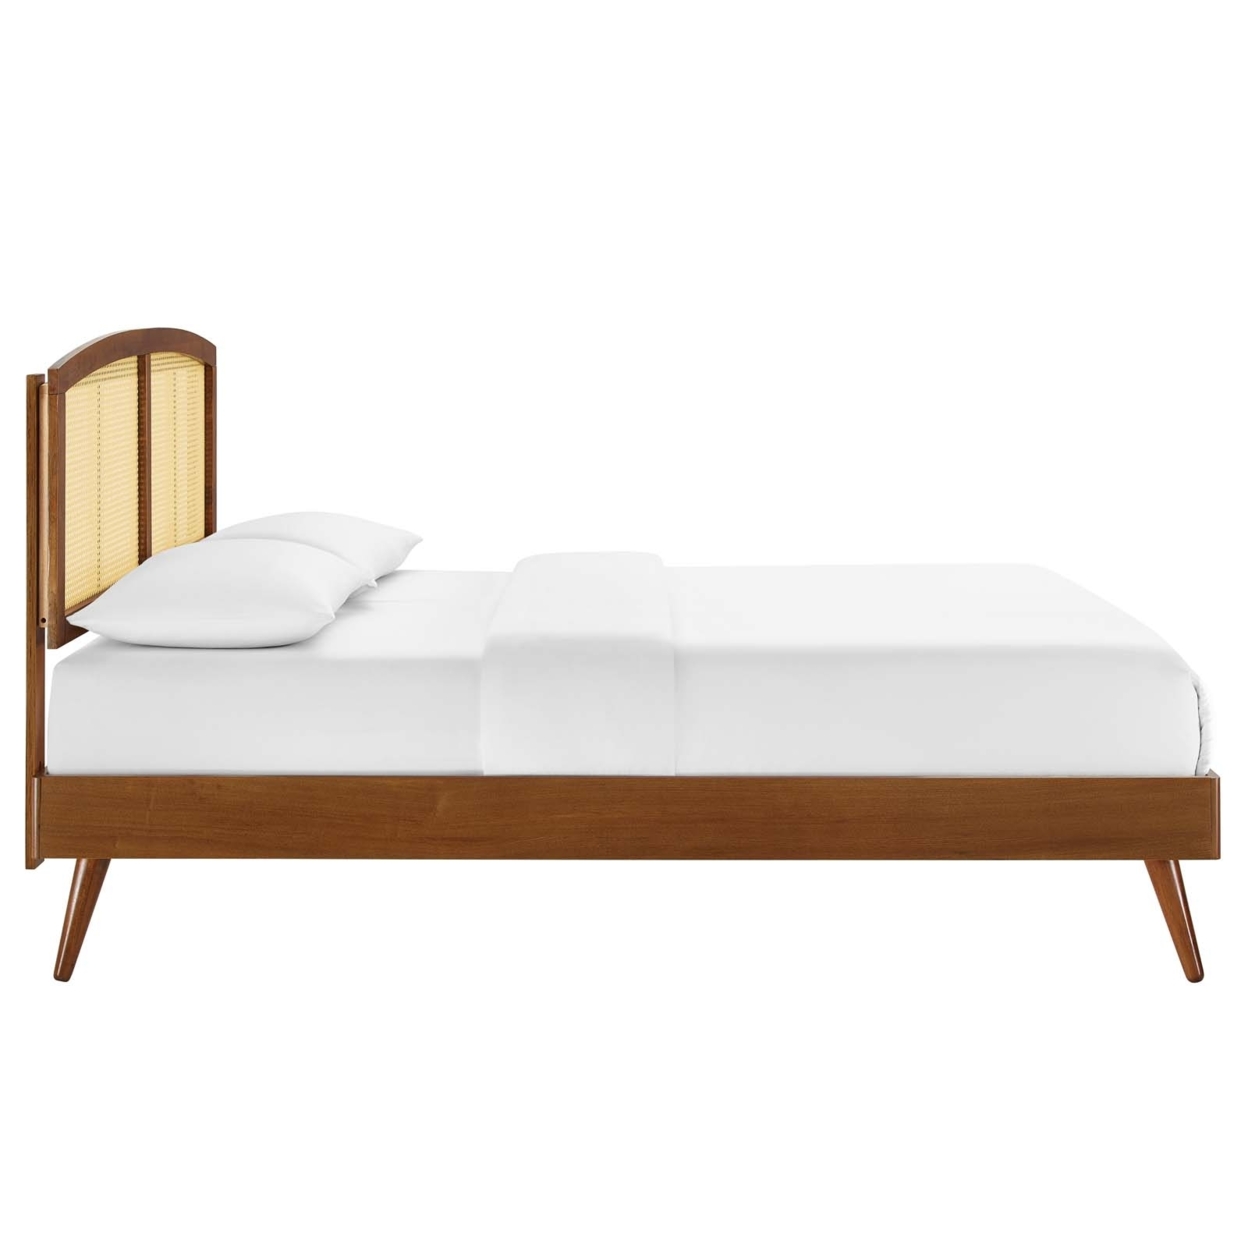 Sierra Cane And Wood Queen Platform Bed With Splayed Legs, Walnut